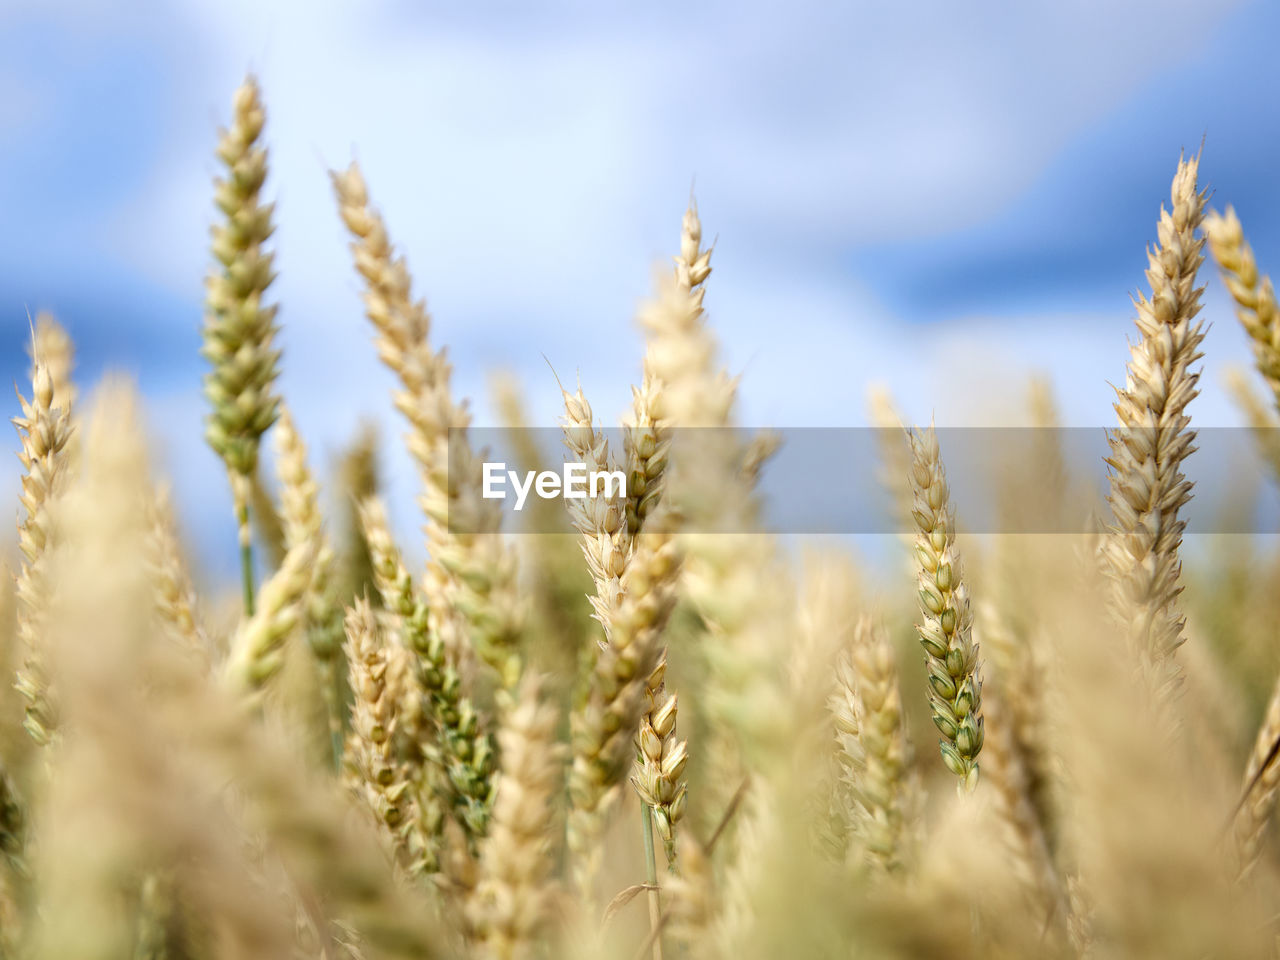 agriculture, cereal plant, crop, plant, rural scene, landscape, food, field, growth, land, sky, nature, wheat, summer, farm, food and drink, beauty in nature, environment, barley, close-up, harvesting, food grain, no people, backgrounds, gold, whole grain, ripe, cultivated, macro, grass, organic, selective focus, plant stem, cloud, corn, blue, extreme close-up, seed, scenics - nature, outdoors, copy space, emmer, vibrant color, yellow, sunlight, einkorn wheat, triticale, food staple, idyllic, freshness